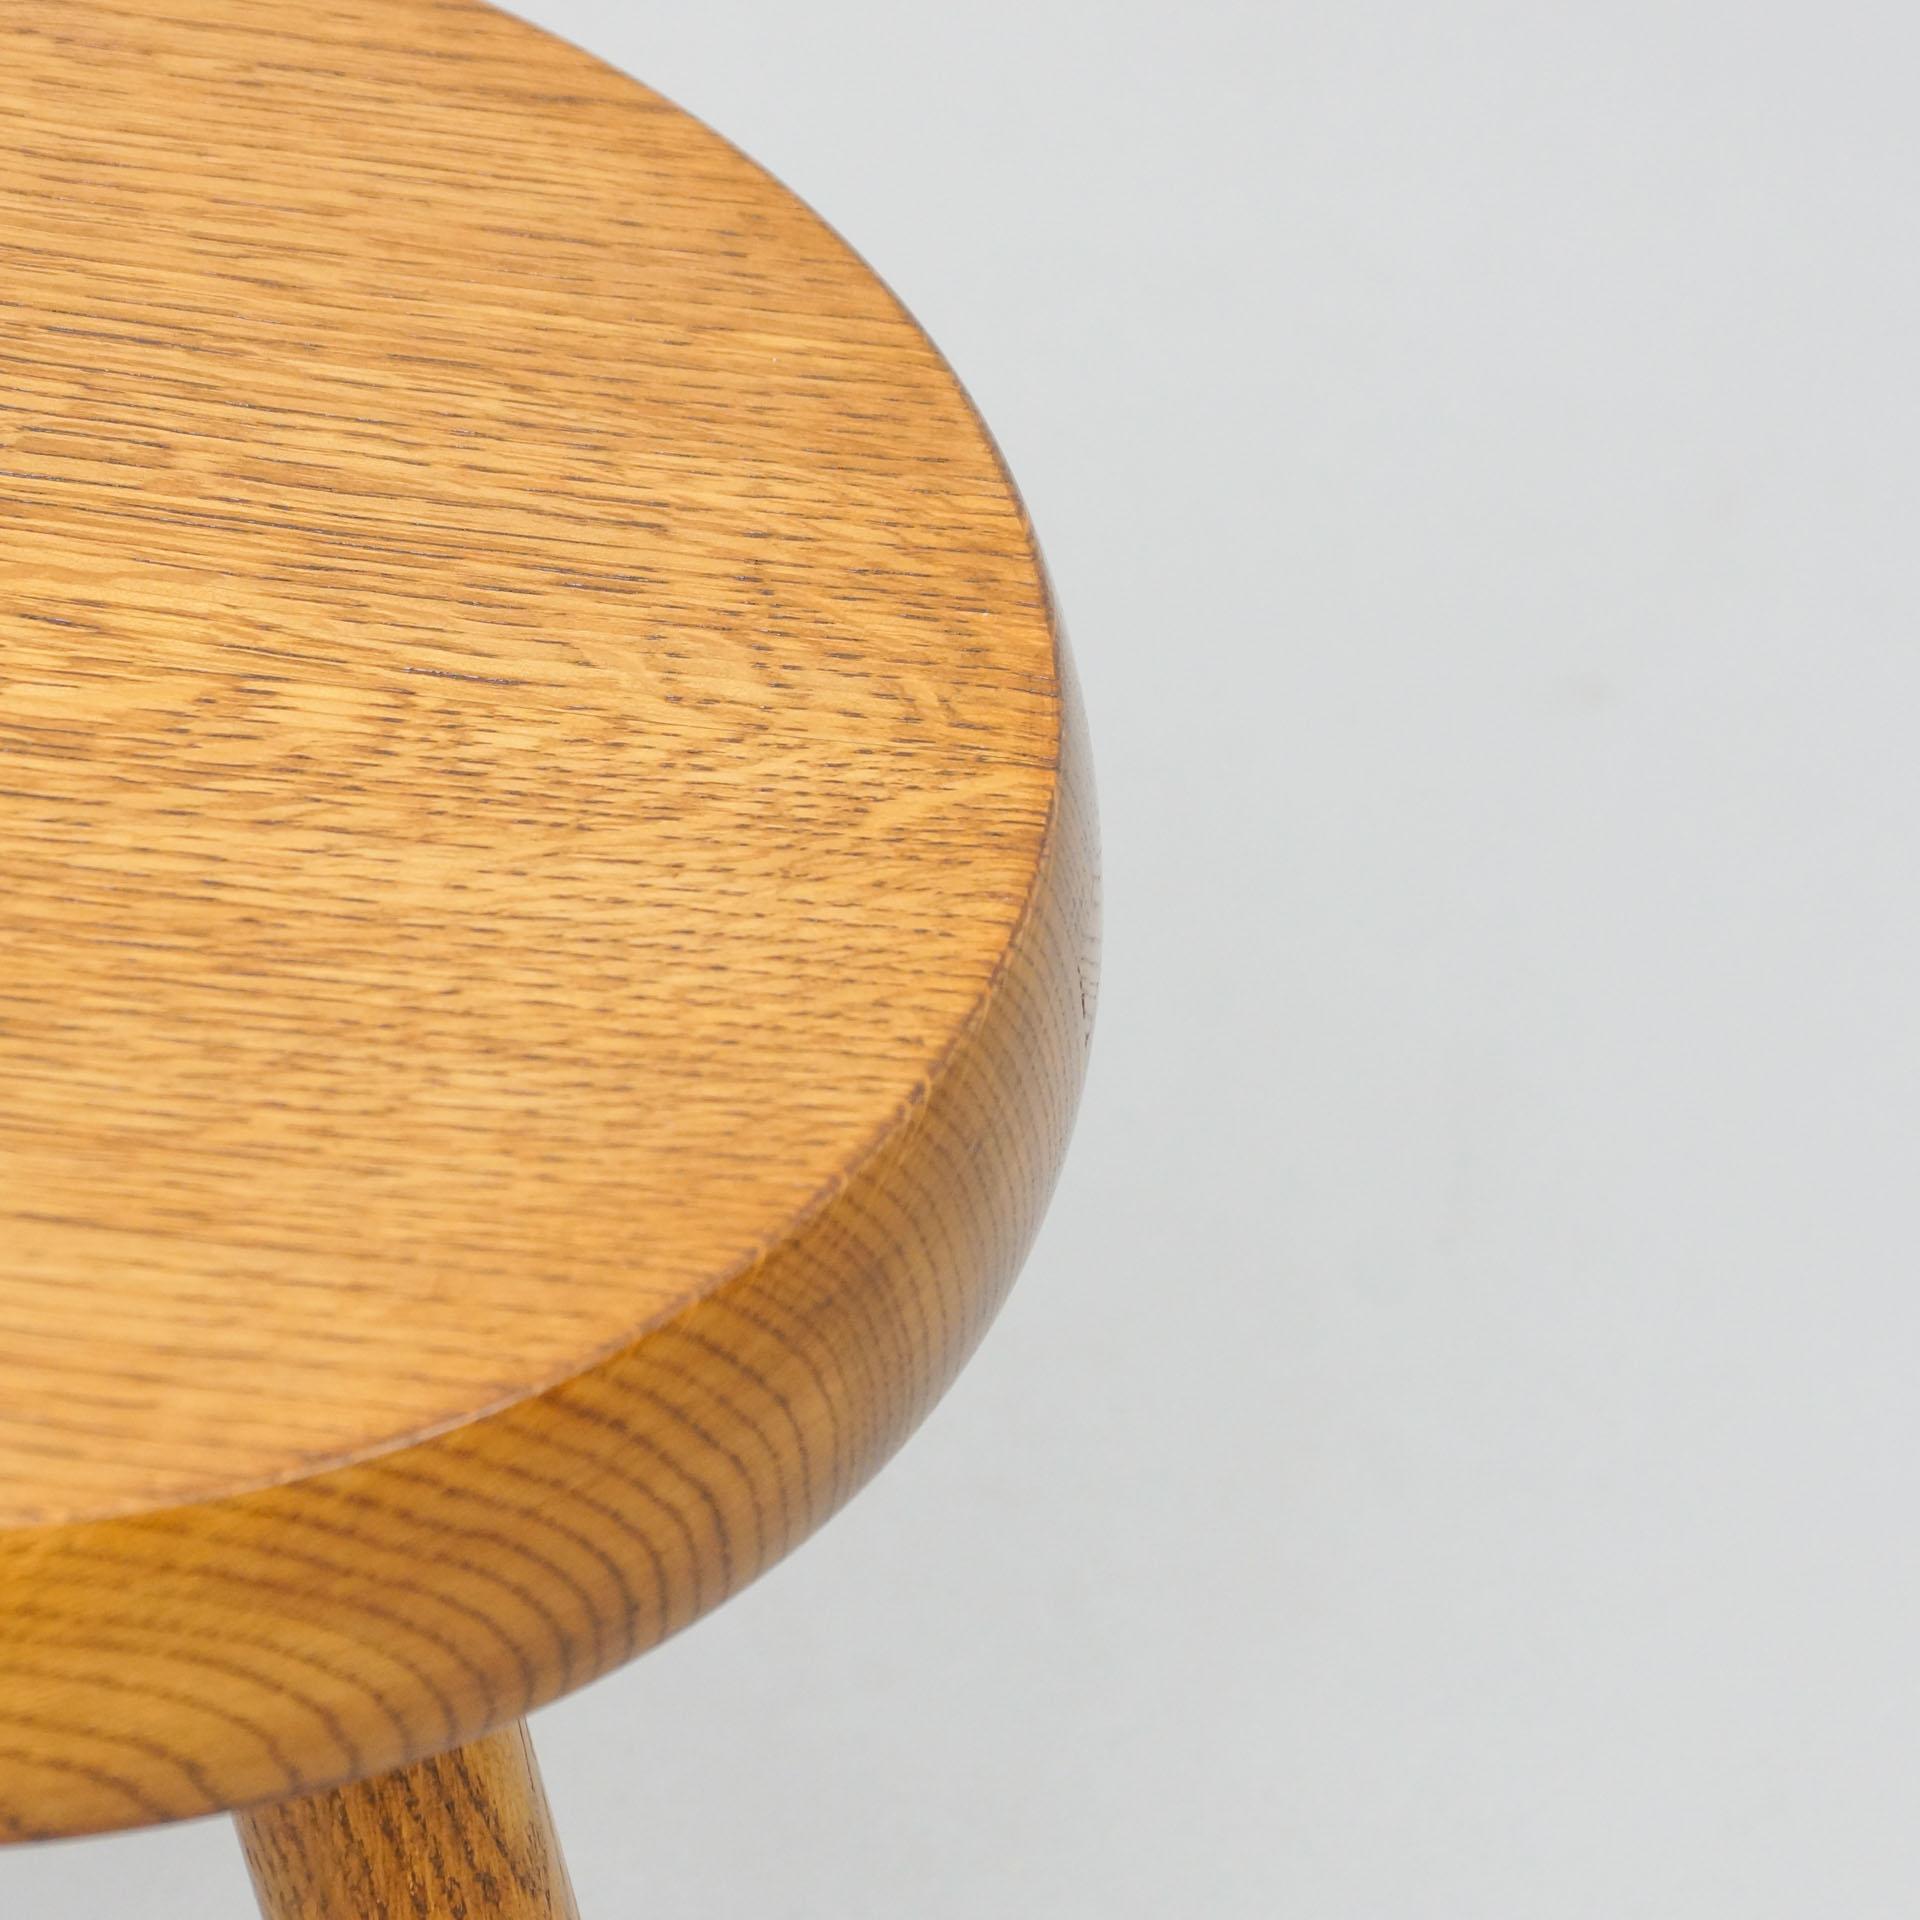 Mid-Century Modern Wood Tripod Stool in the Style of Charlotte Perriand 1